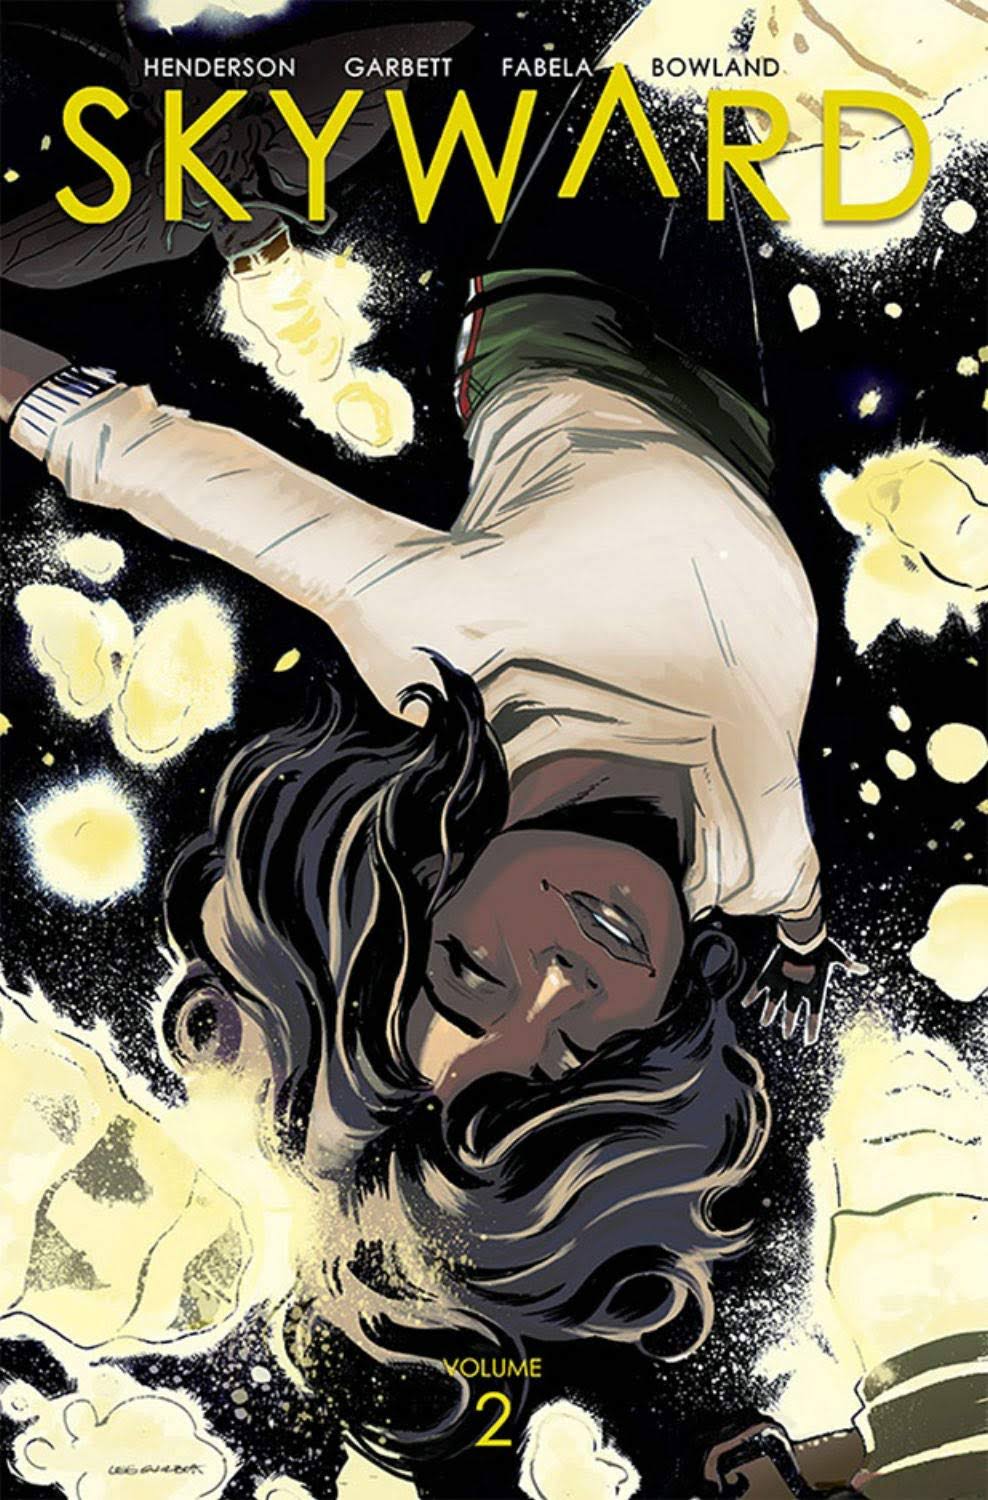 Skyward Volume 2: Here There Be Dragonflies - Image Comics